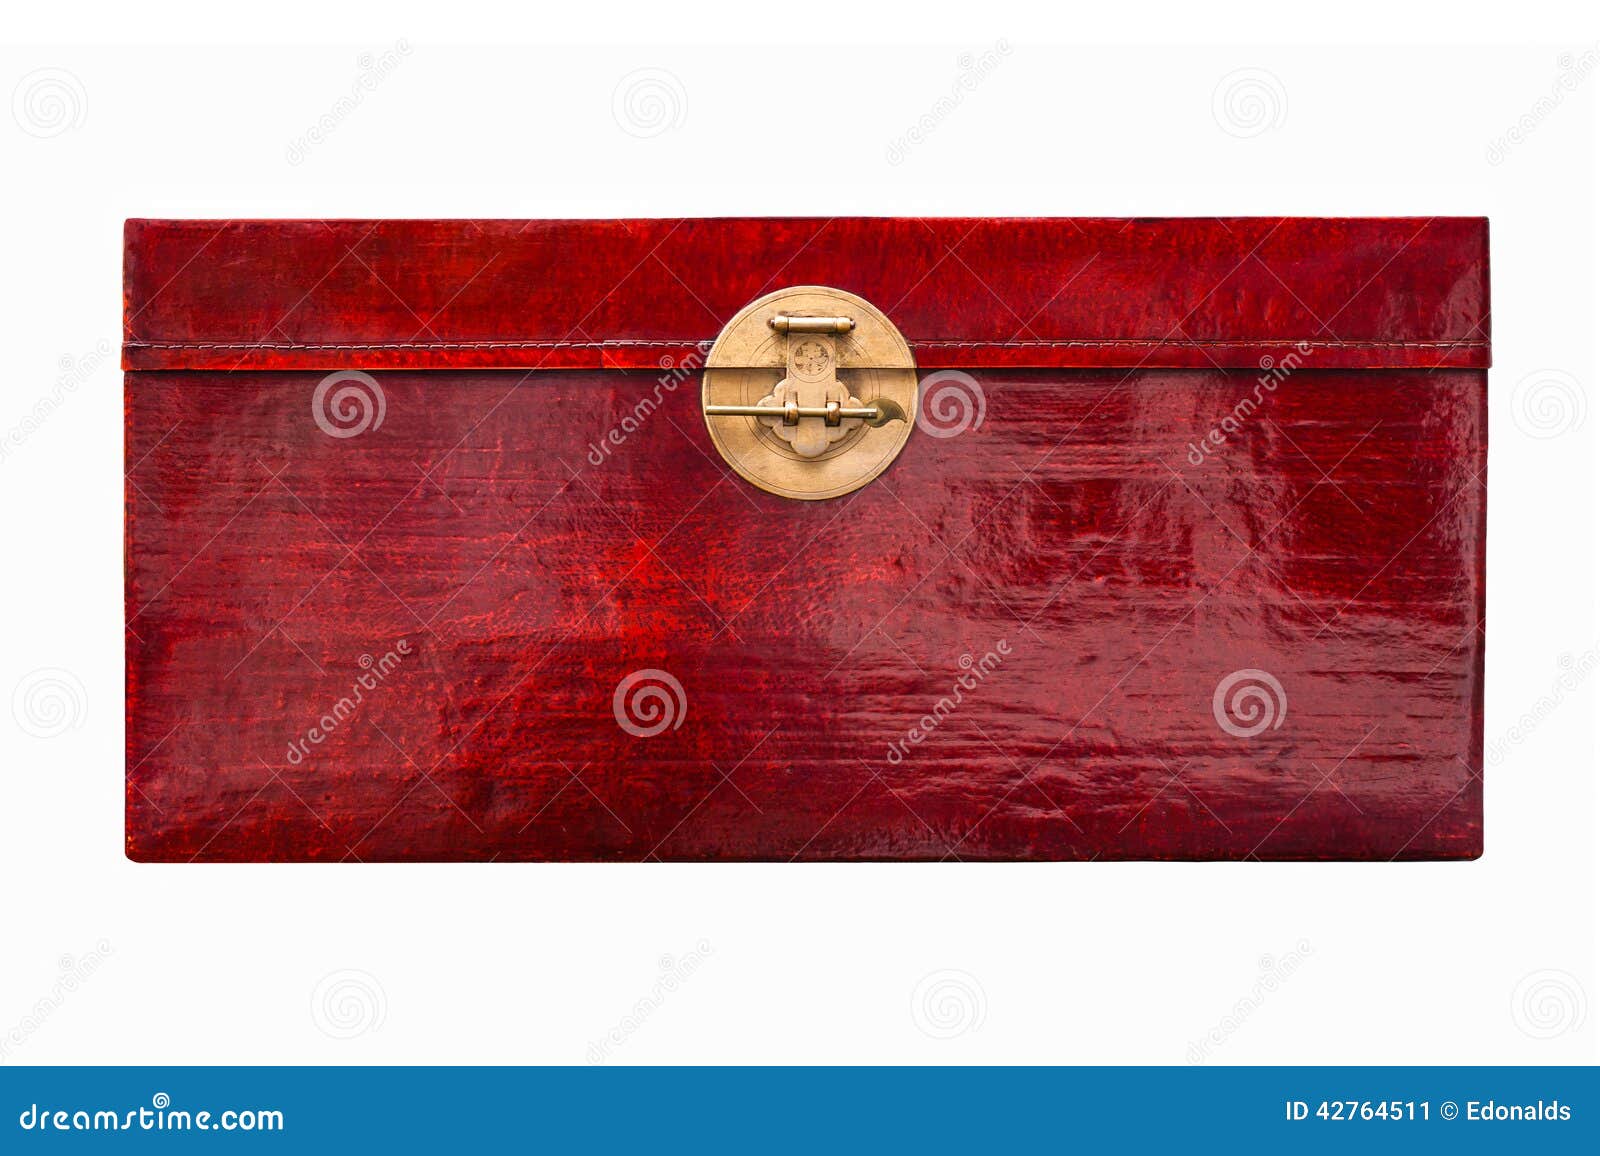 red lacquer box